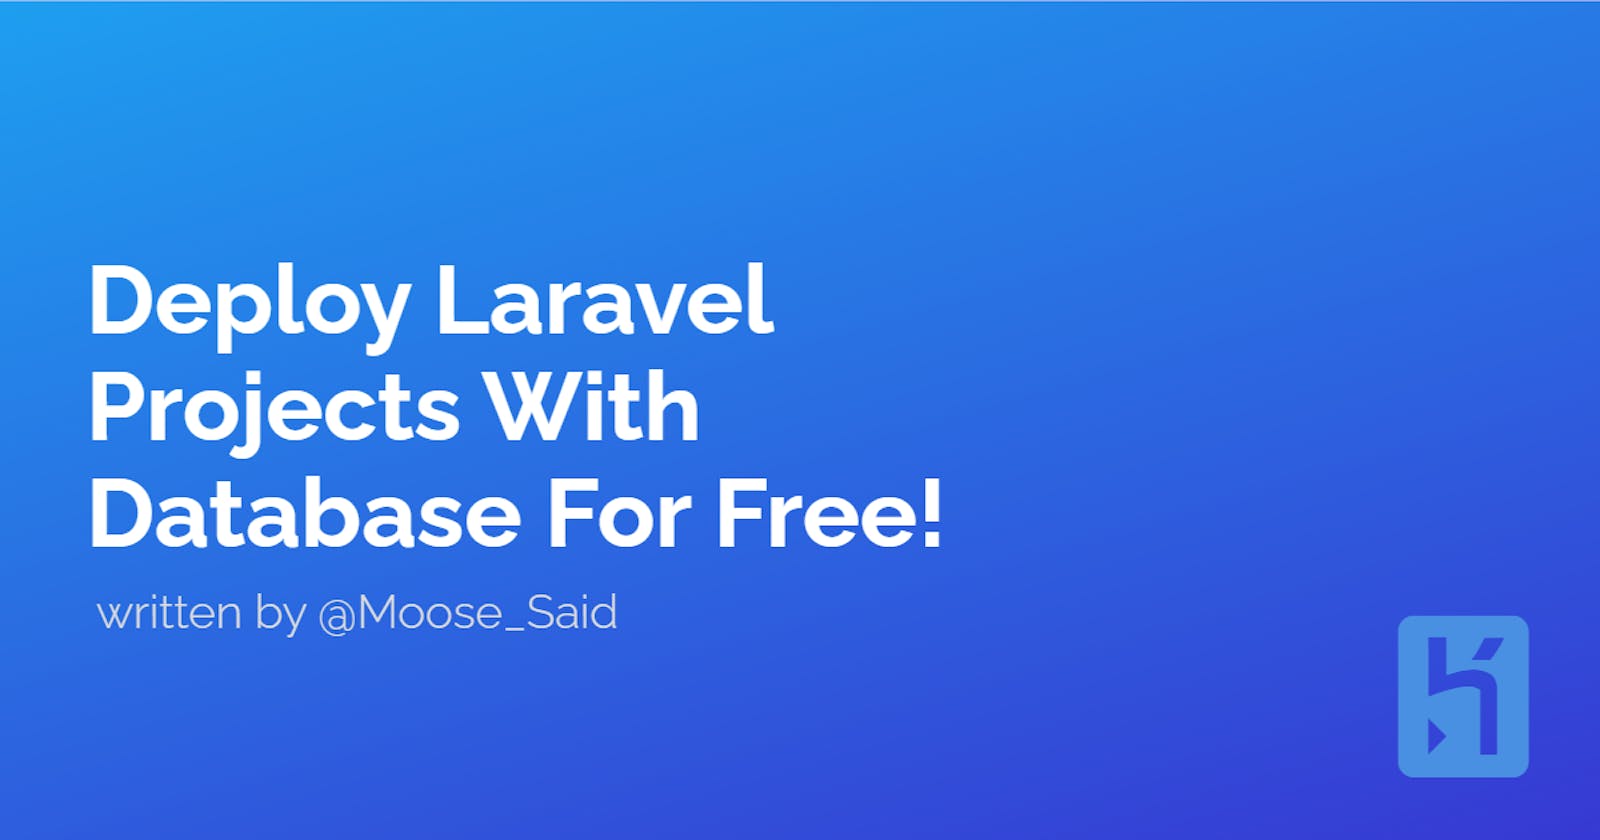 Deploy Laravel Projects With Database For Free!